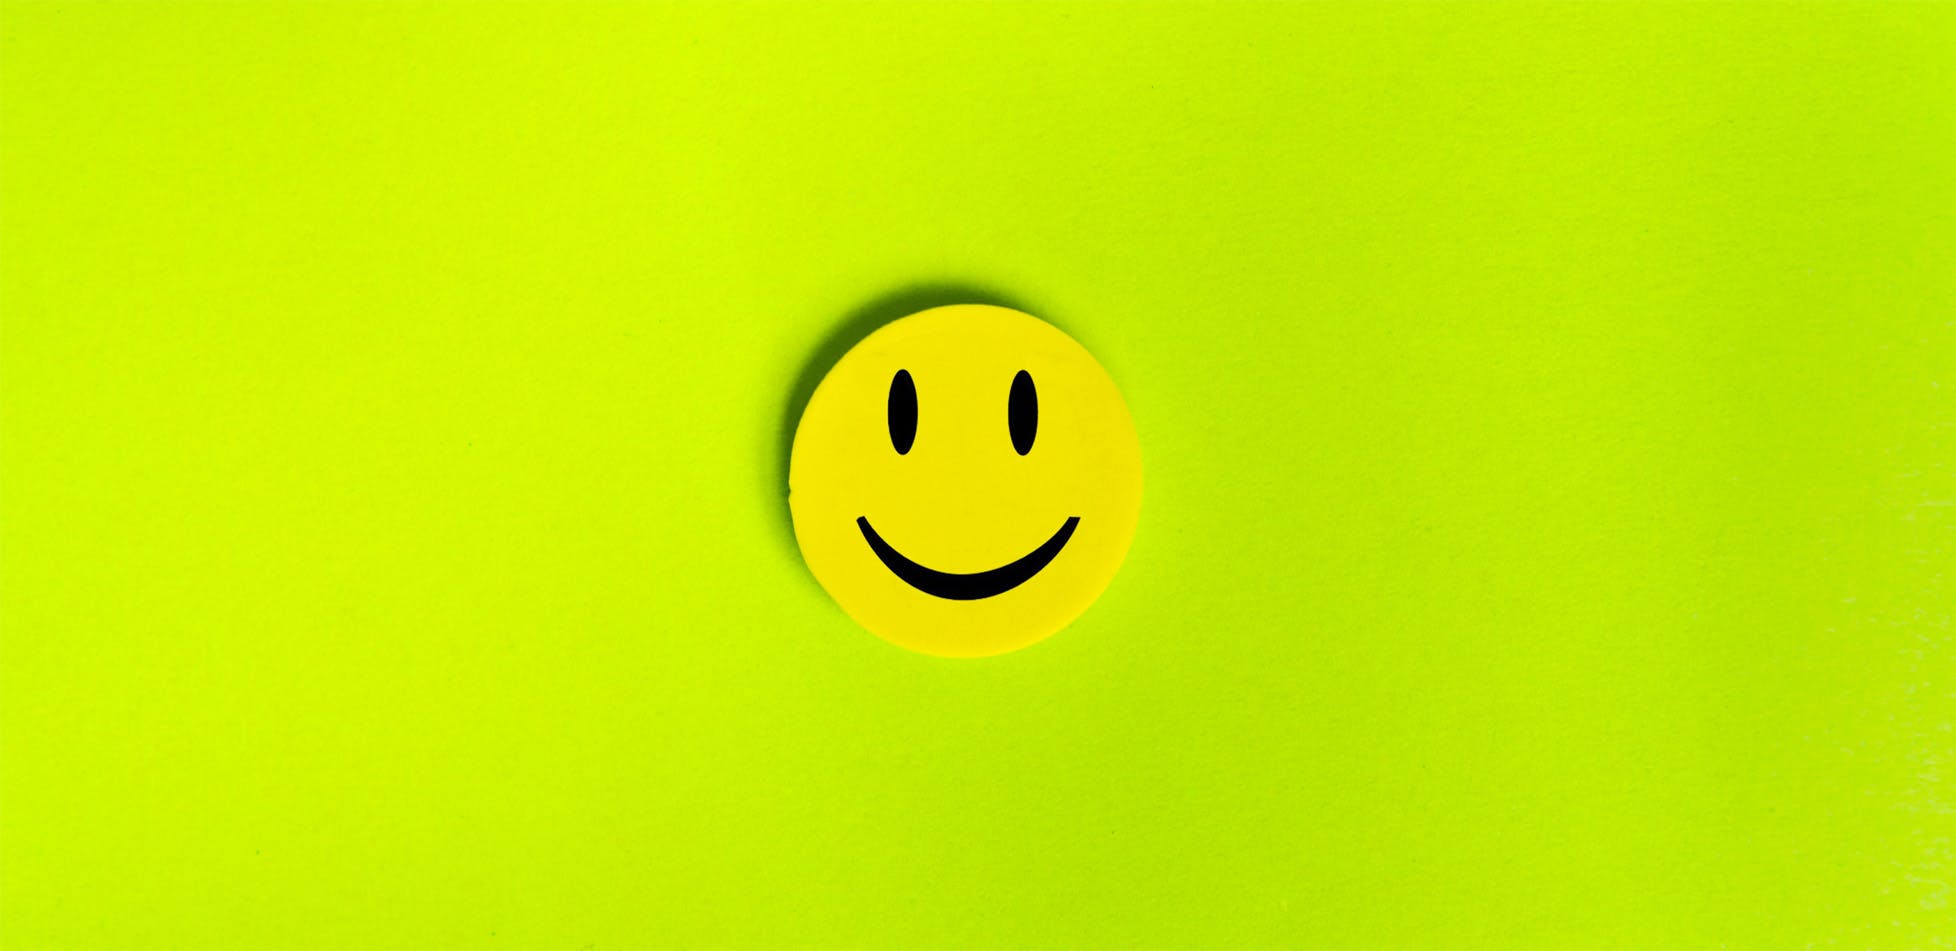 Positive,Funny,Smiley,Face,On,A,Green,Cardboard,Background.,Copy